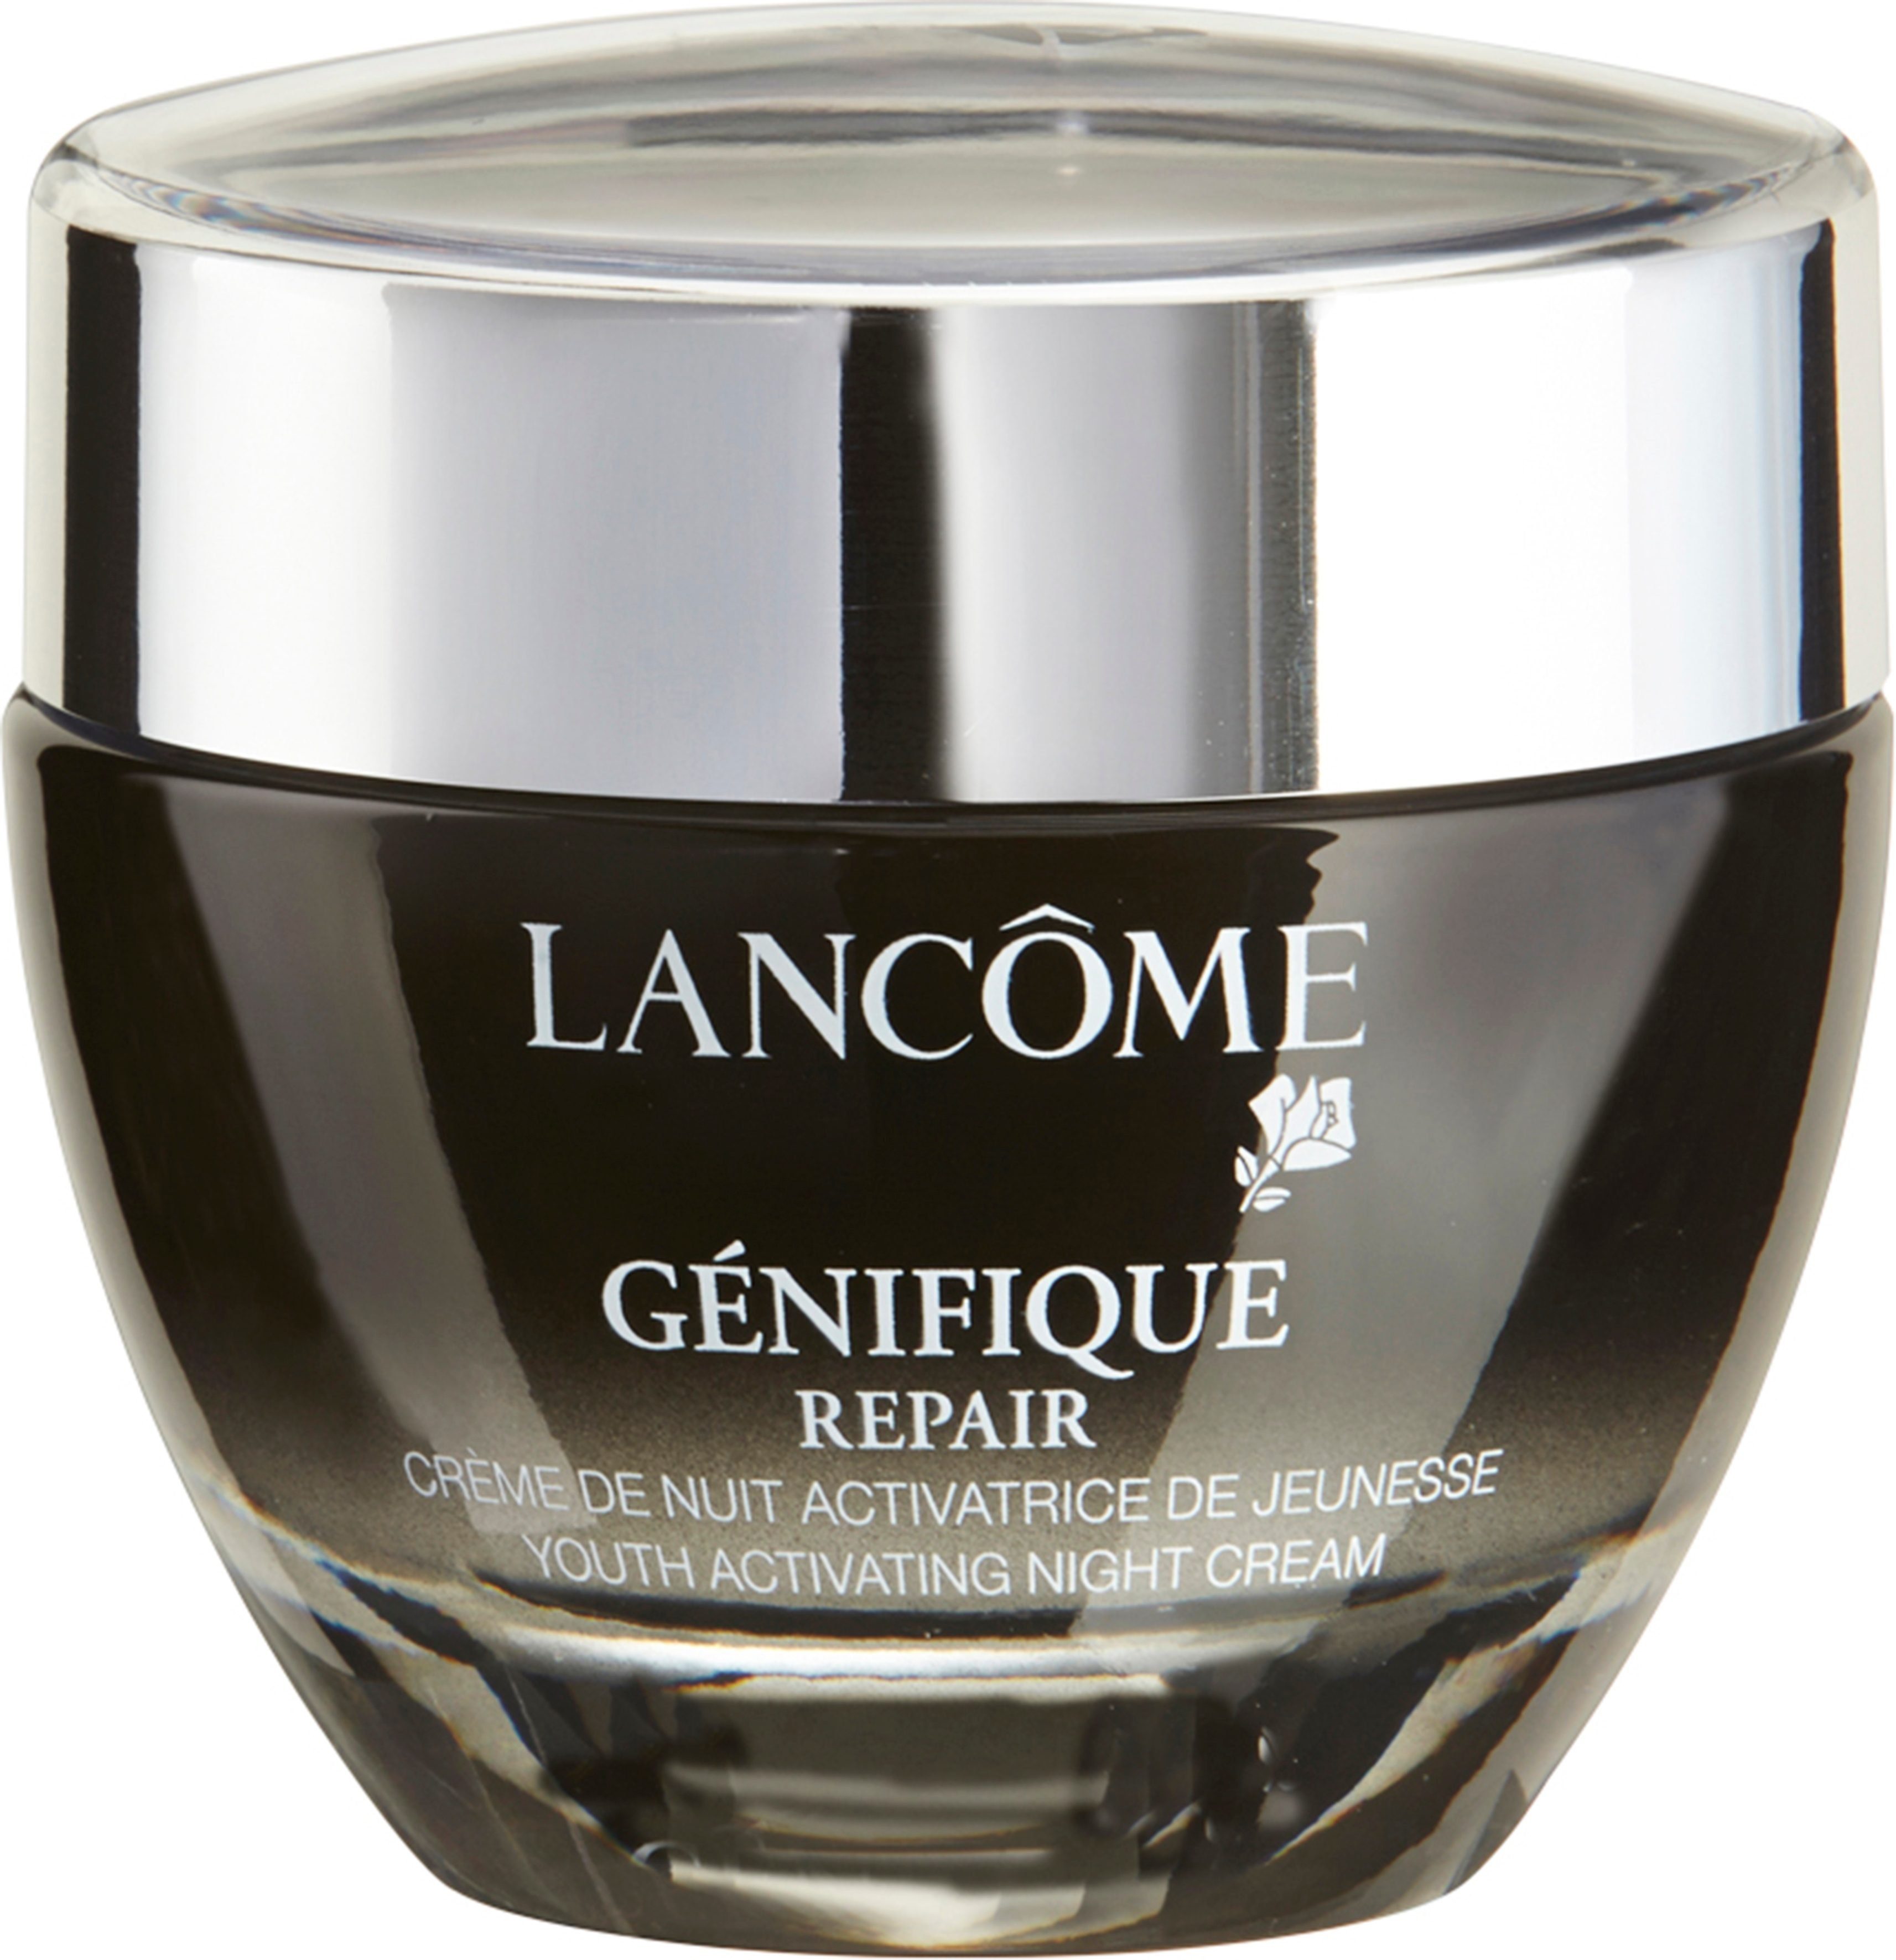 LANCOME Anti-Aging-Creme lancome Genifique Repair Youth Activating night